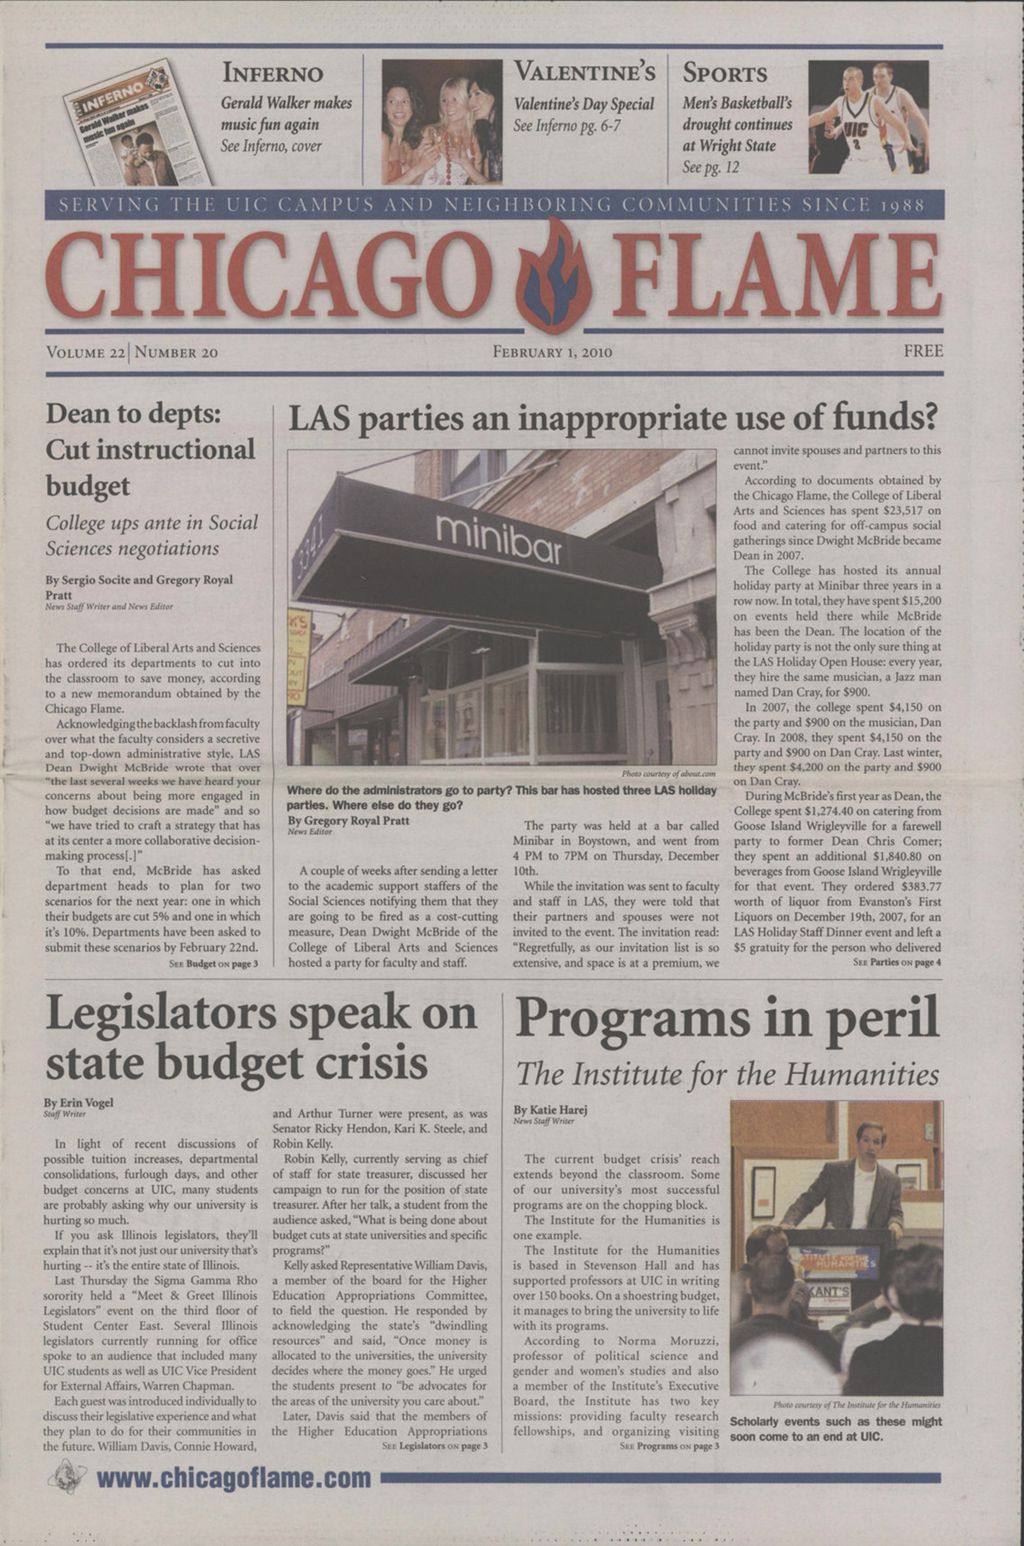 Miniature of Chicago Flame (February 1, 2010)